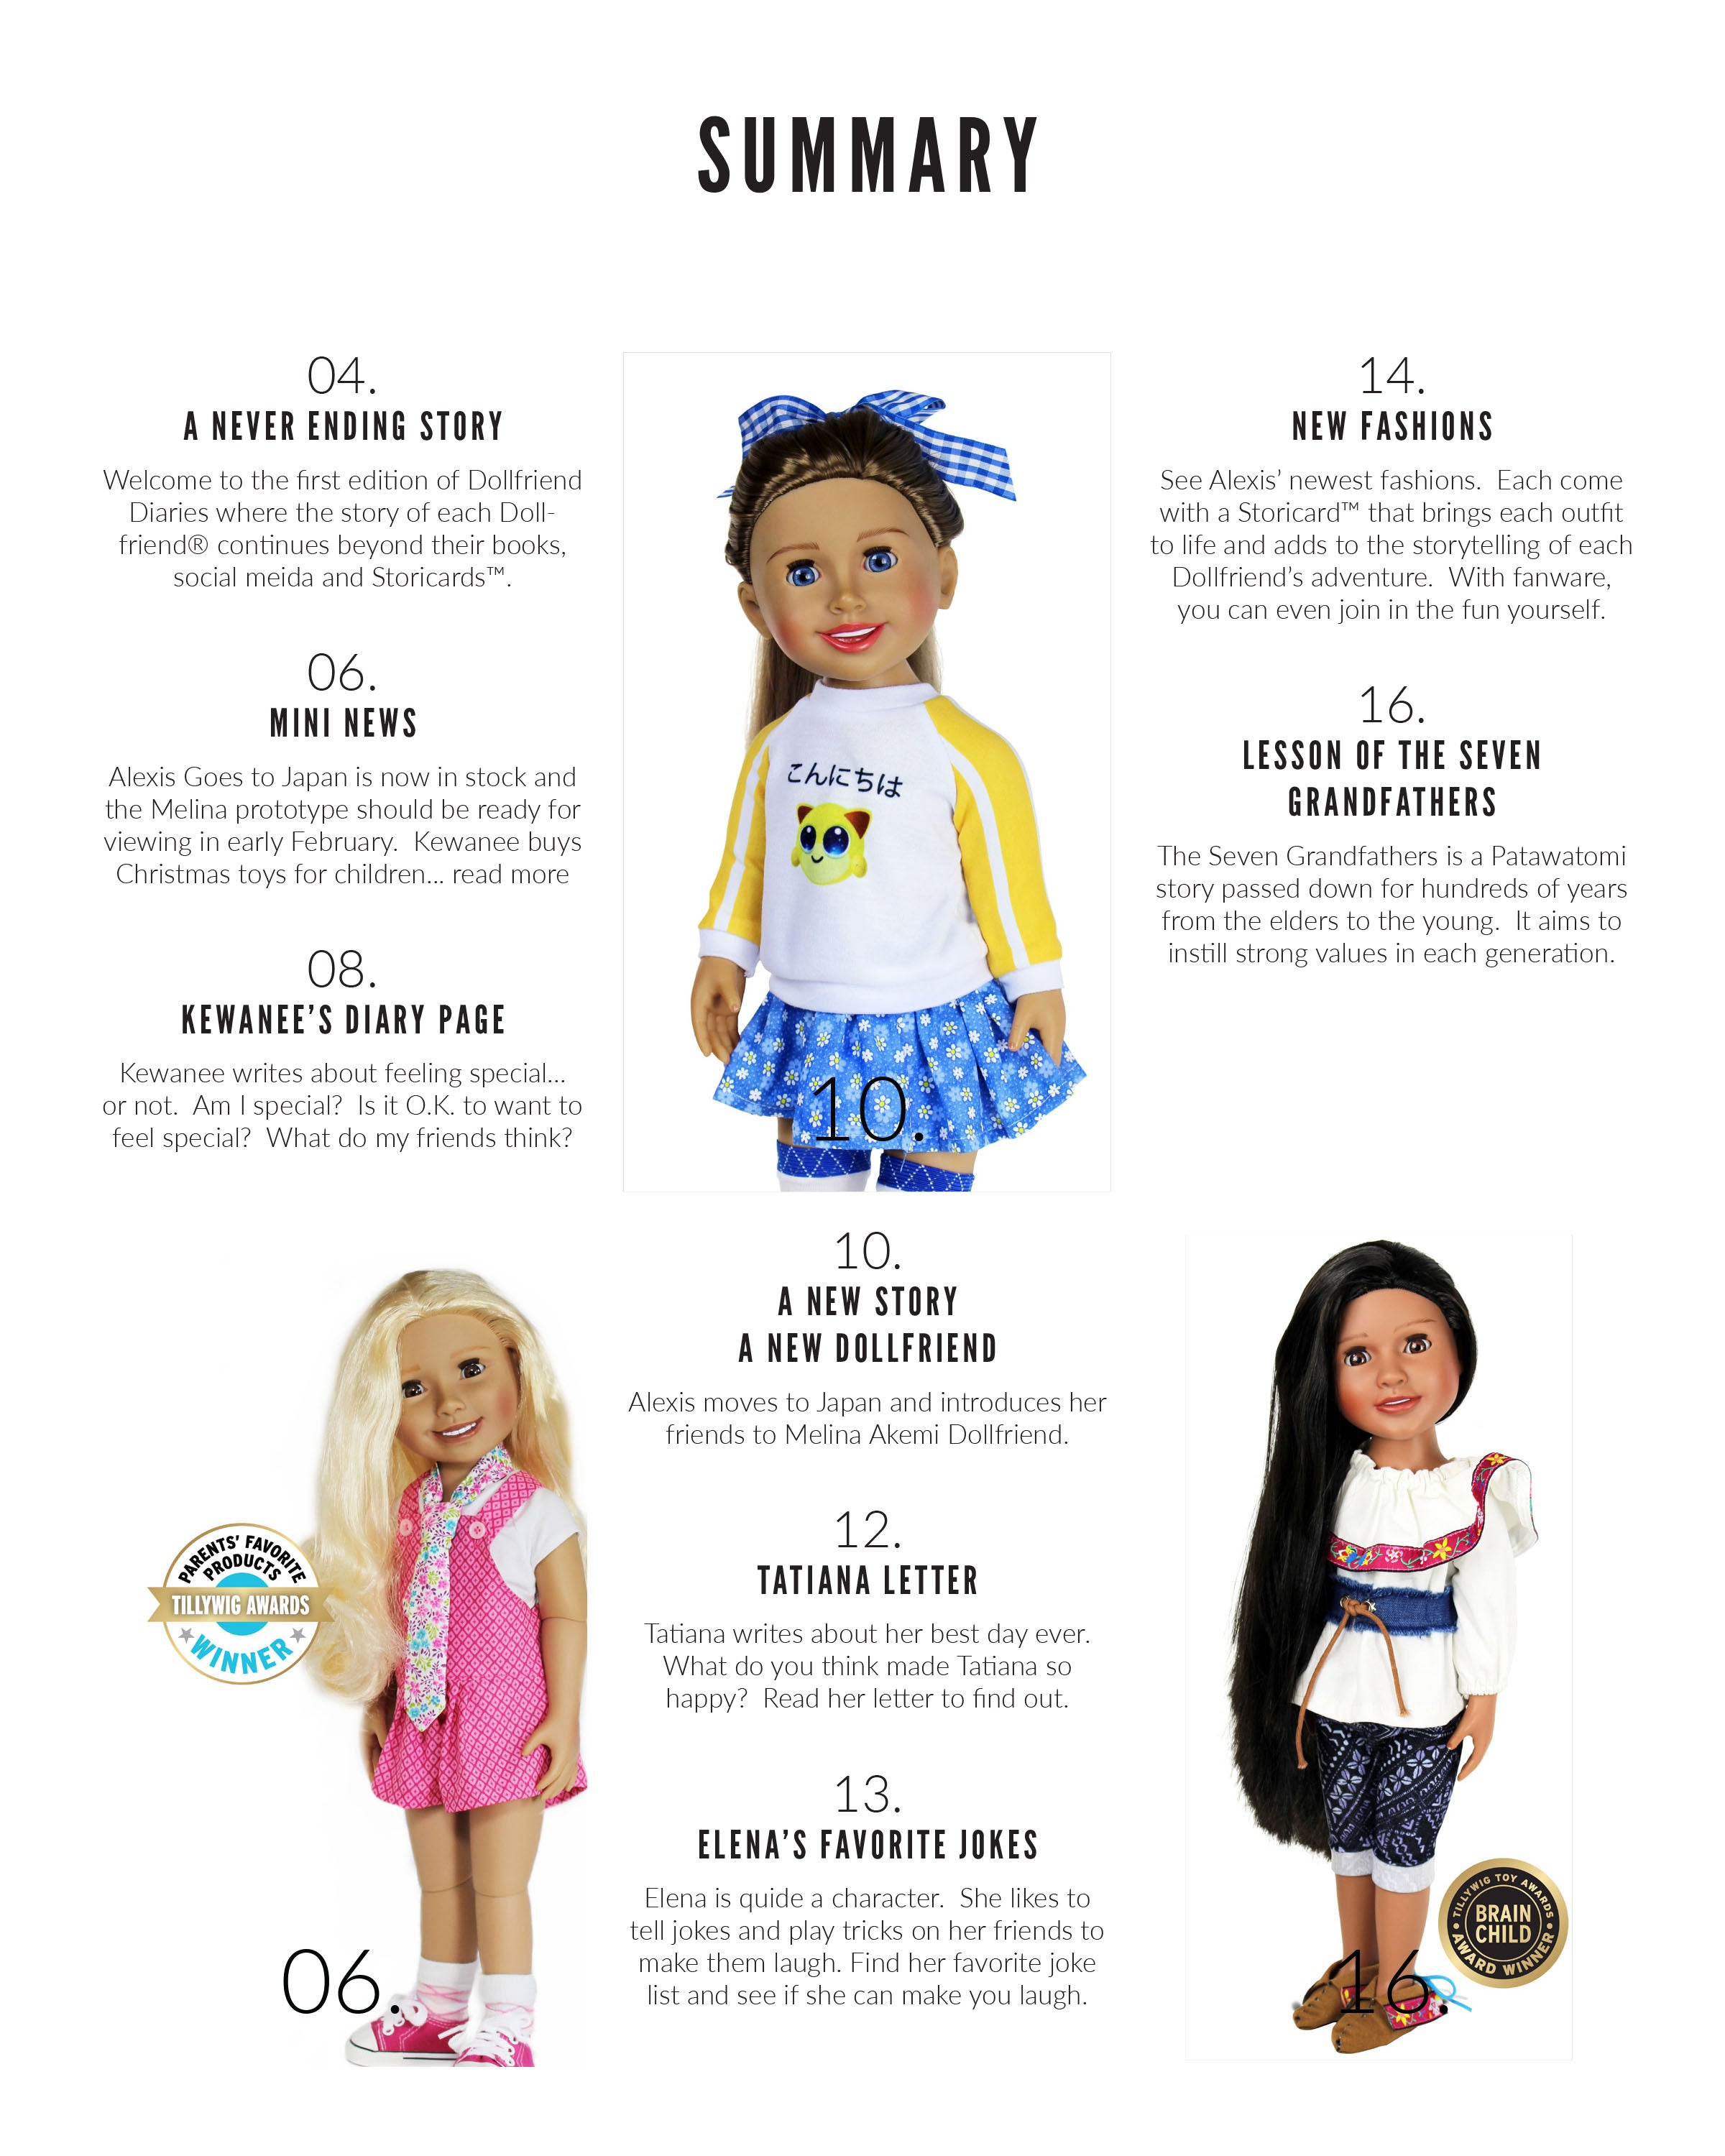 January 2020 Edition of DOLLFRIEND® DIARIES